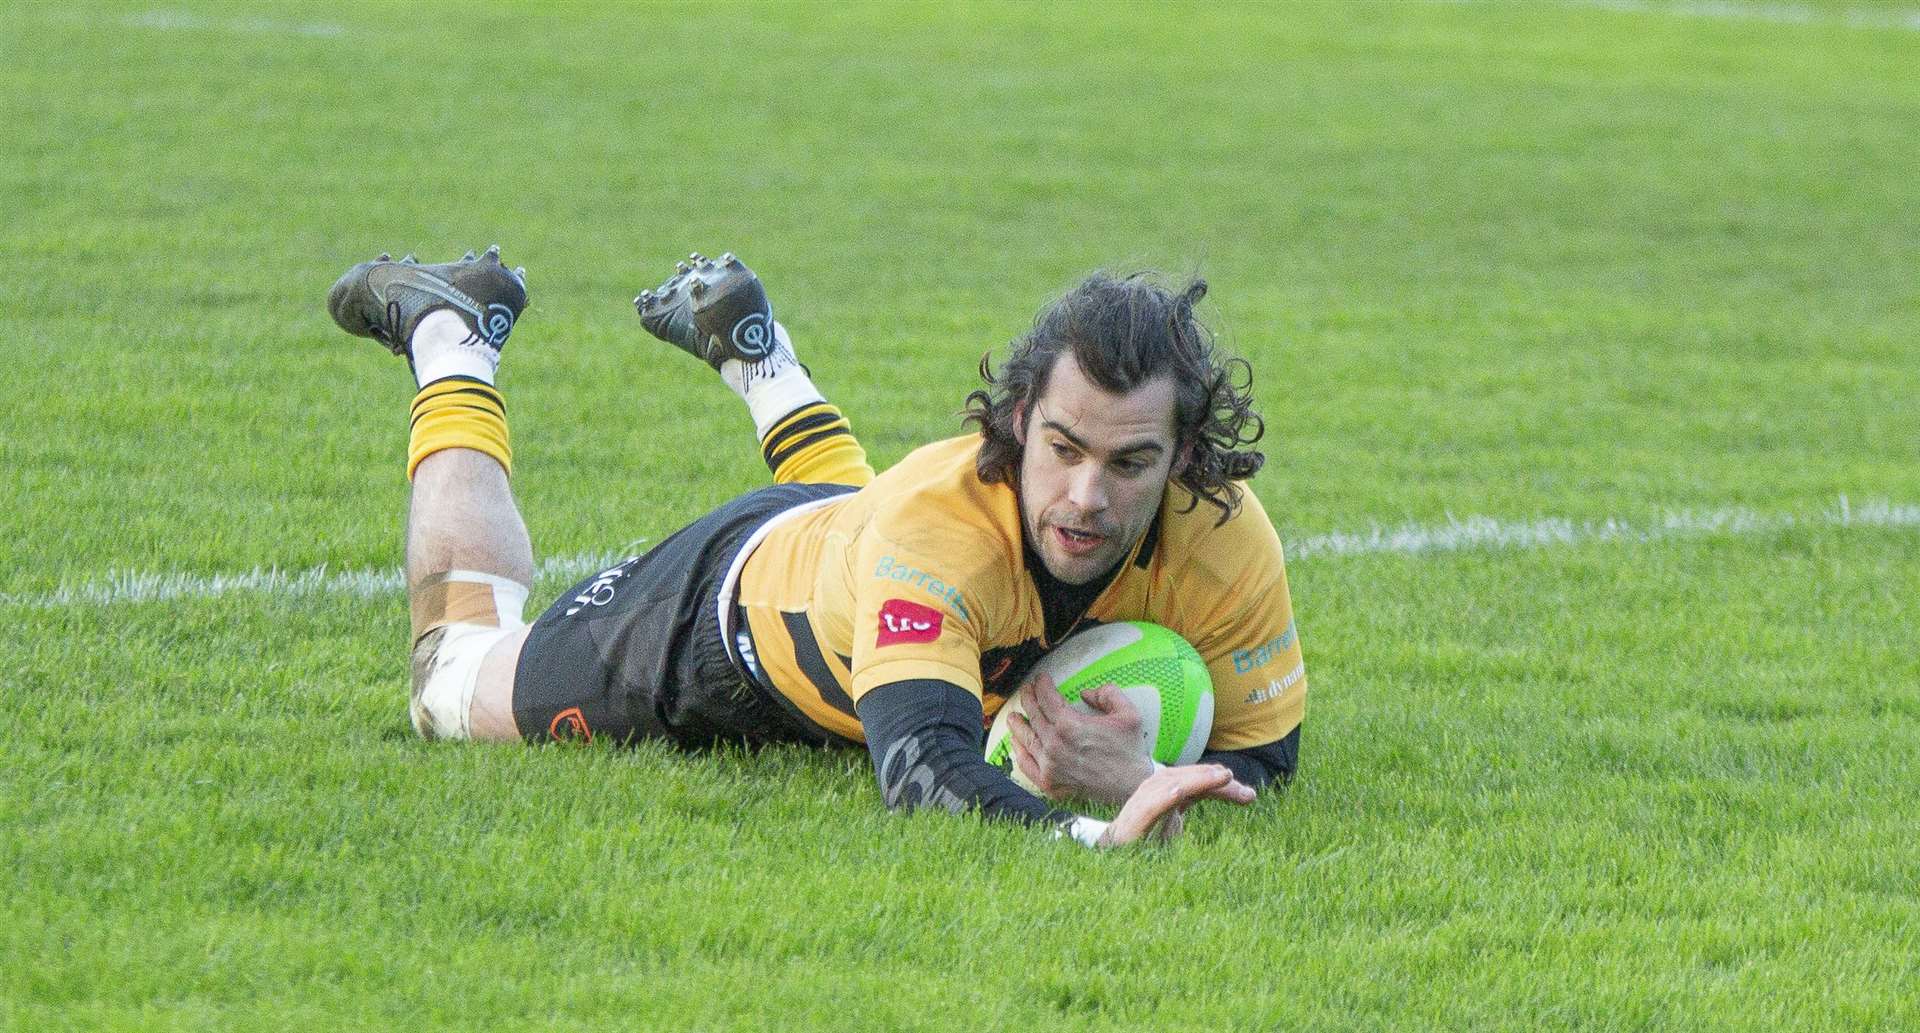 Dwayne Corcoran scored one of Canterbury's tries at Clifton. Picture: Phillipa Hilton